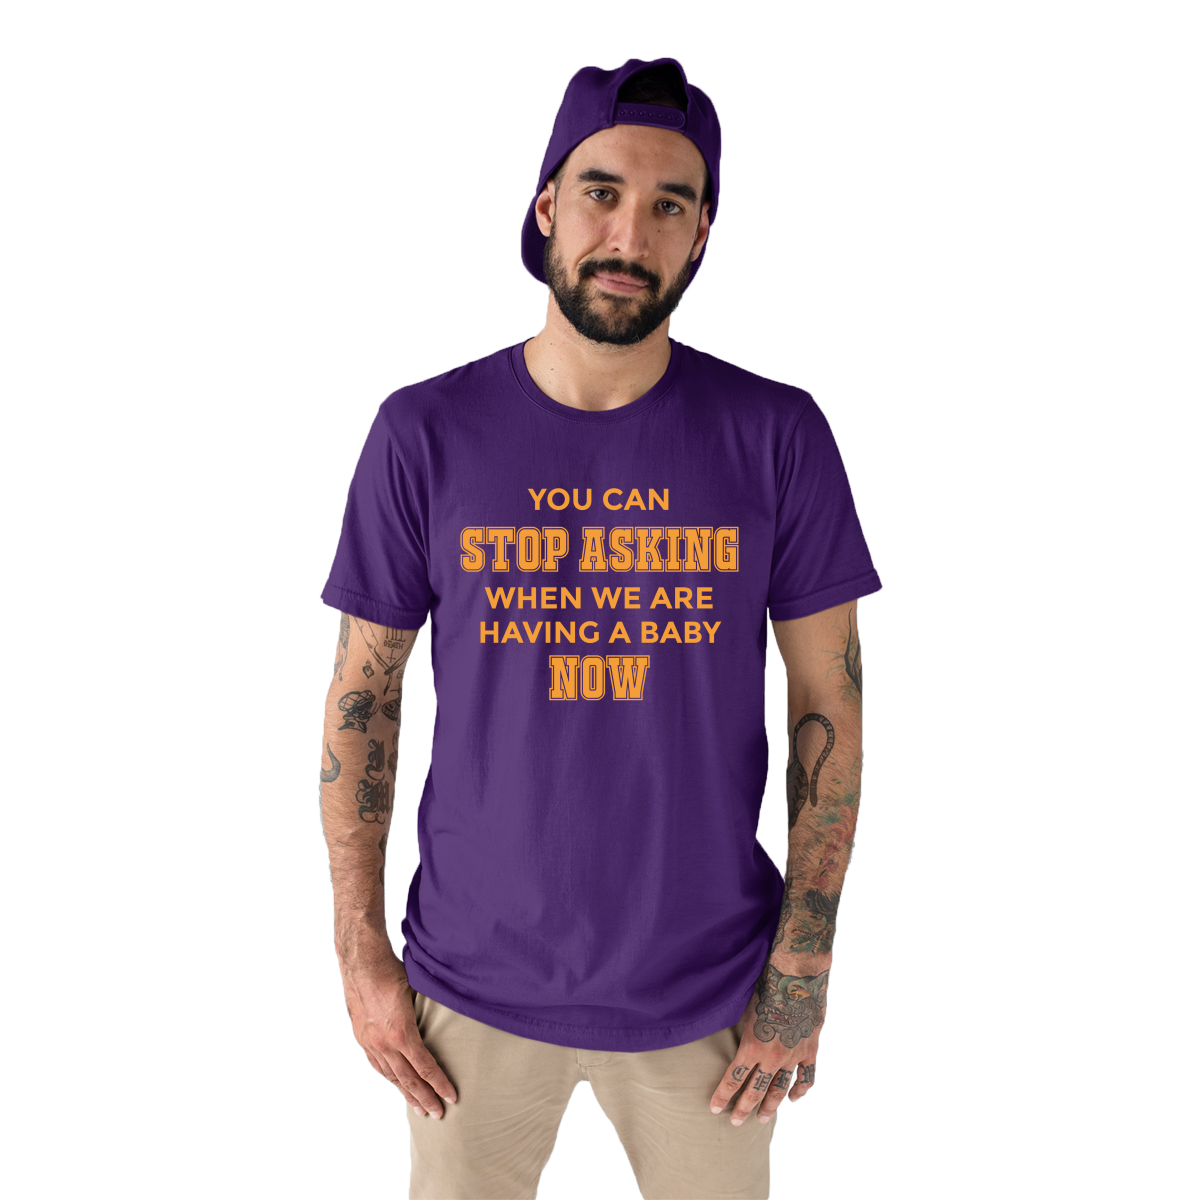 You can stop asking when we are having baby NOW Men's T-shirt | Purple